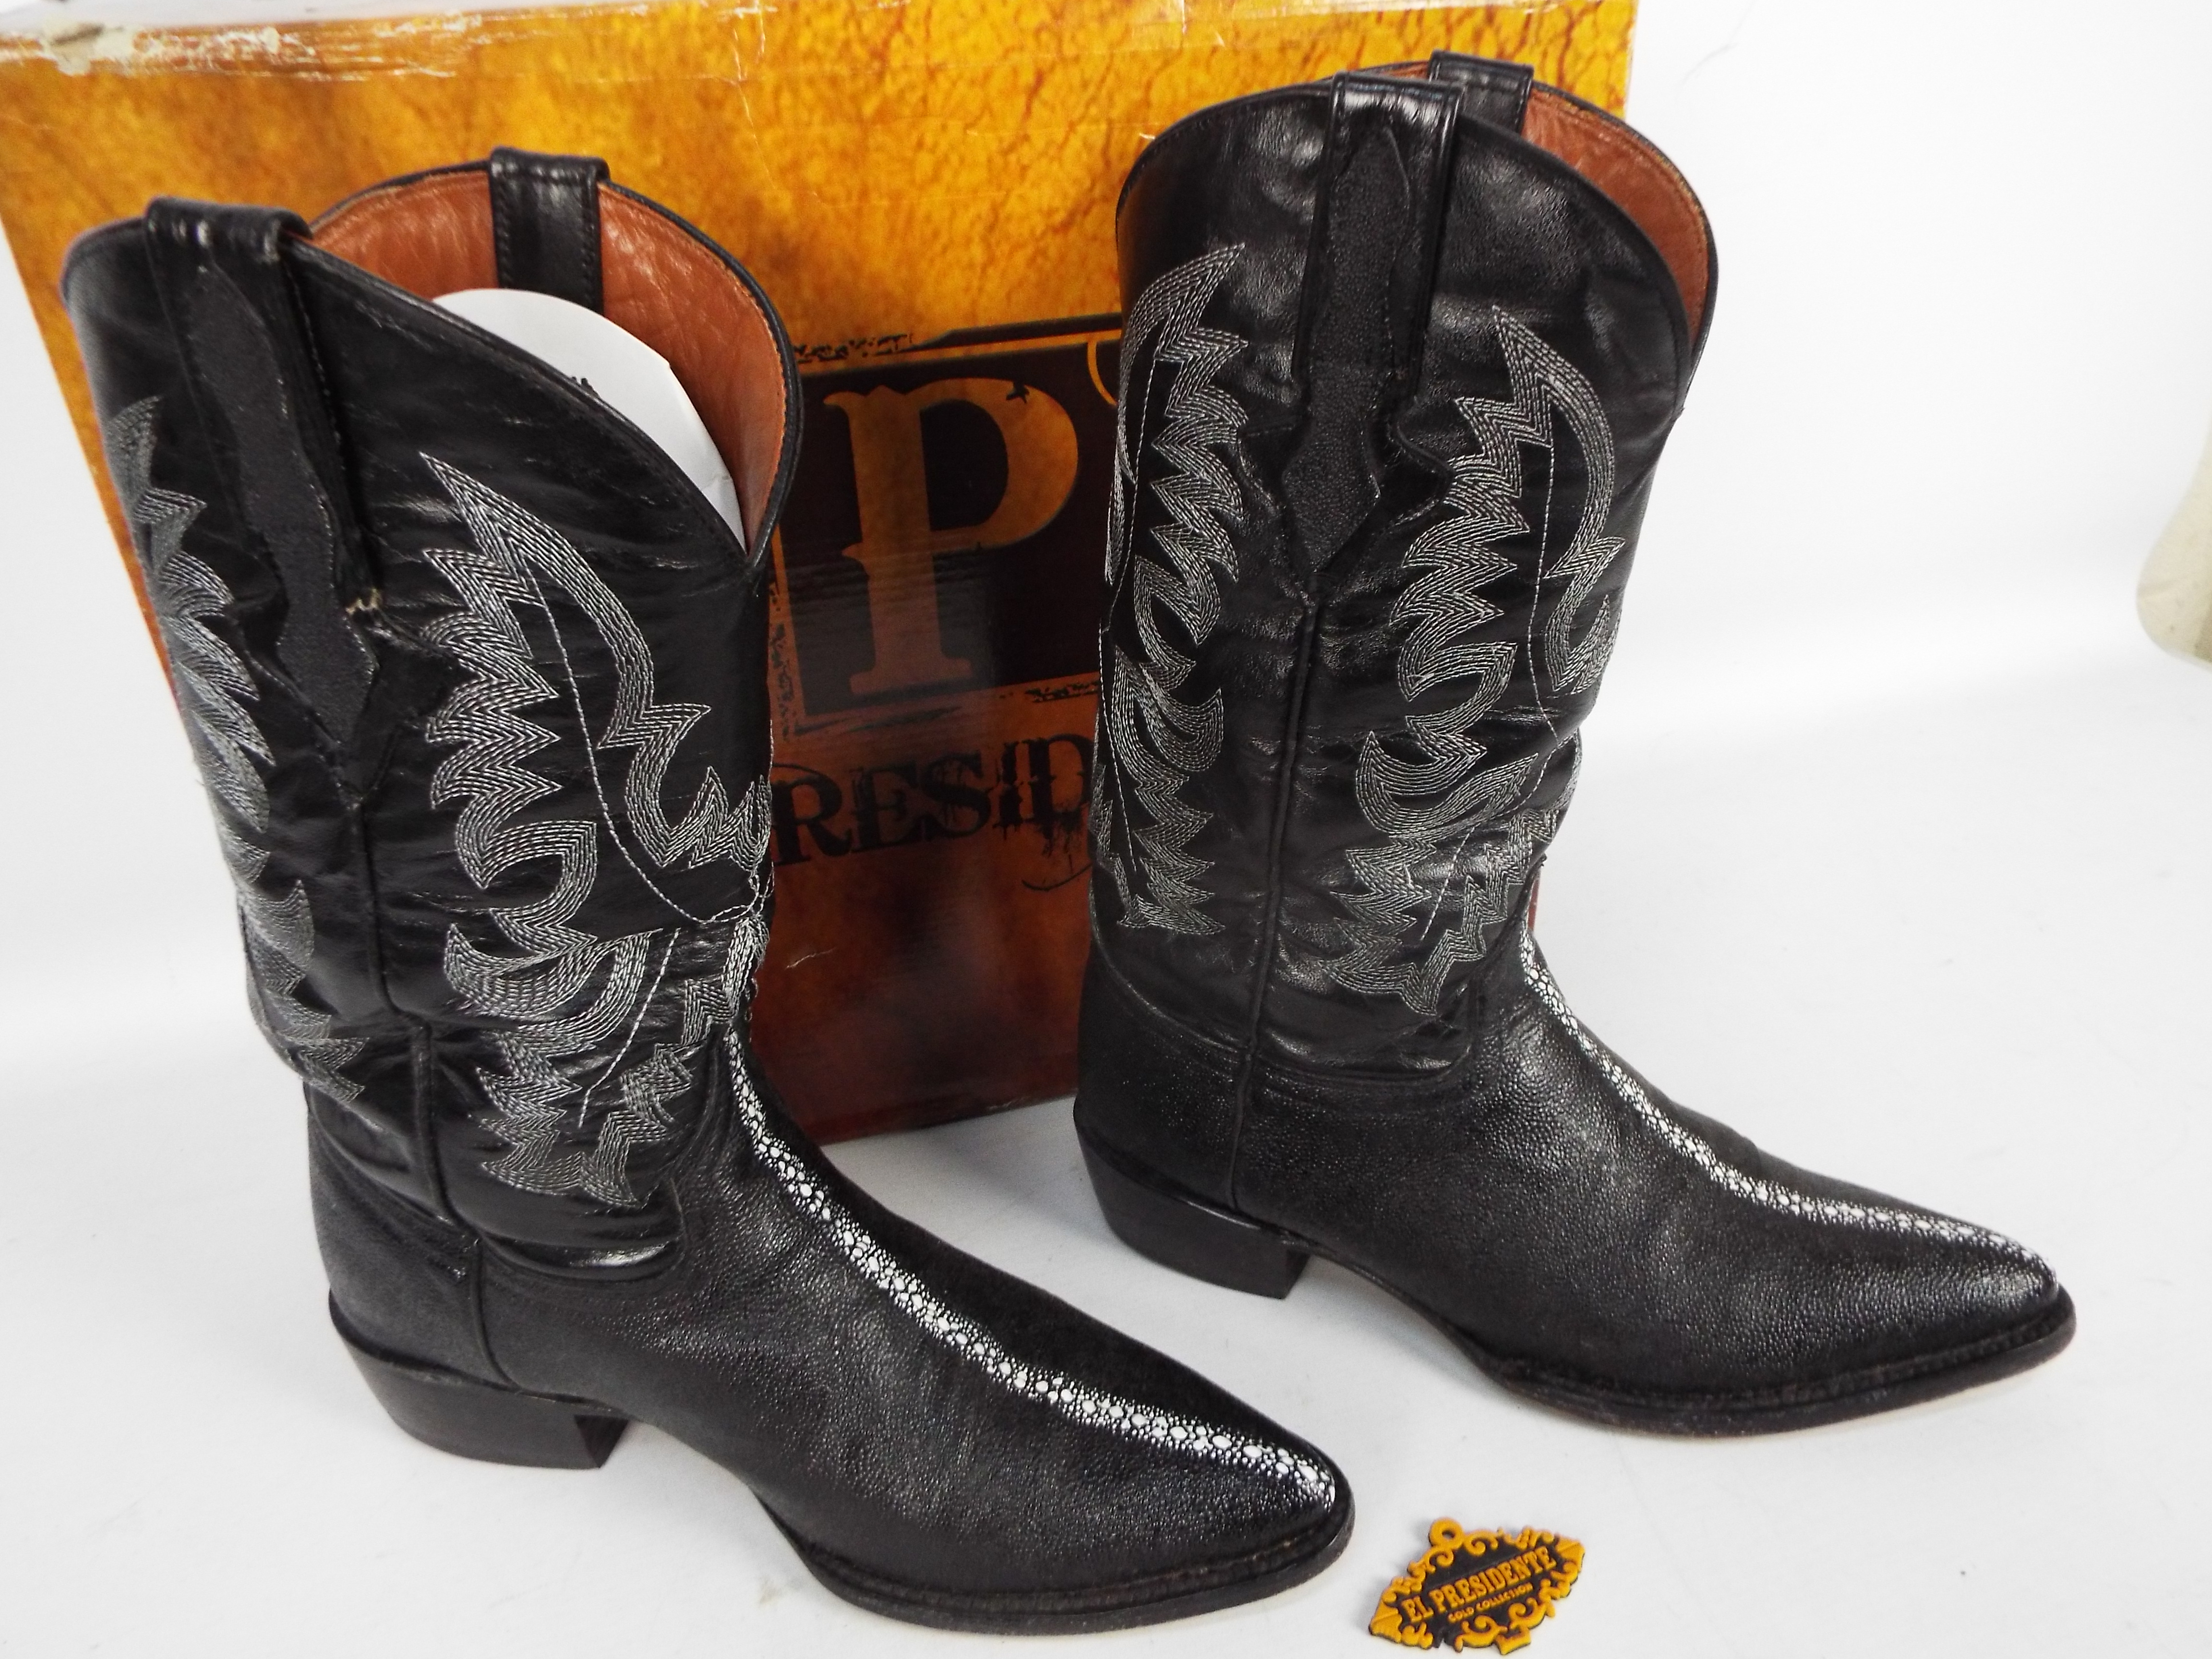 El Presidente Gold Collection - a pair of black boots, UK size 7, EUA size 8, Mexico size 27, - Image 2 of 3